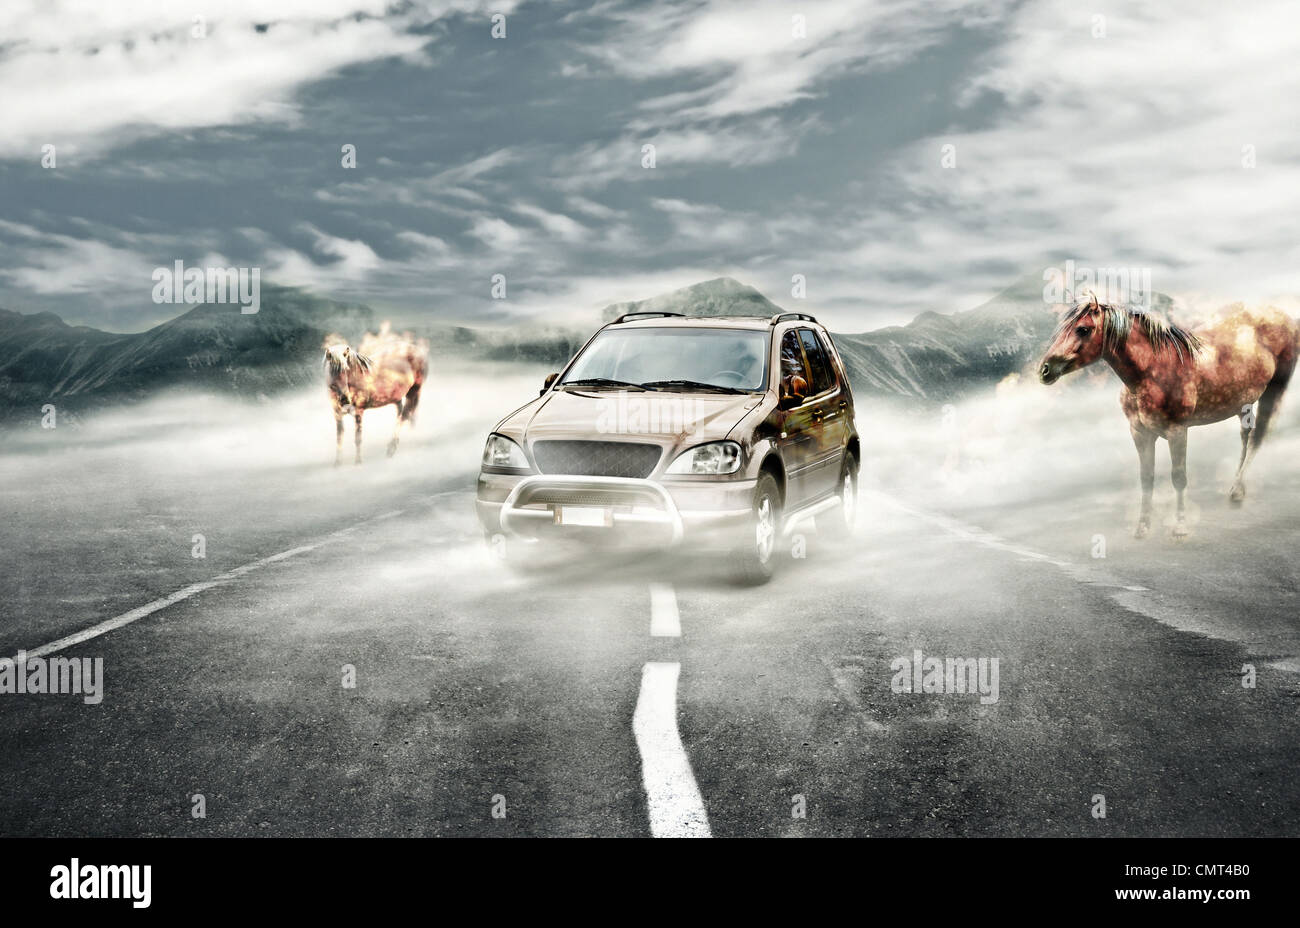 Surreal landscape with mist a car and two fire horses Stock Photo